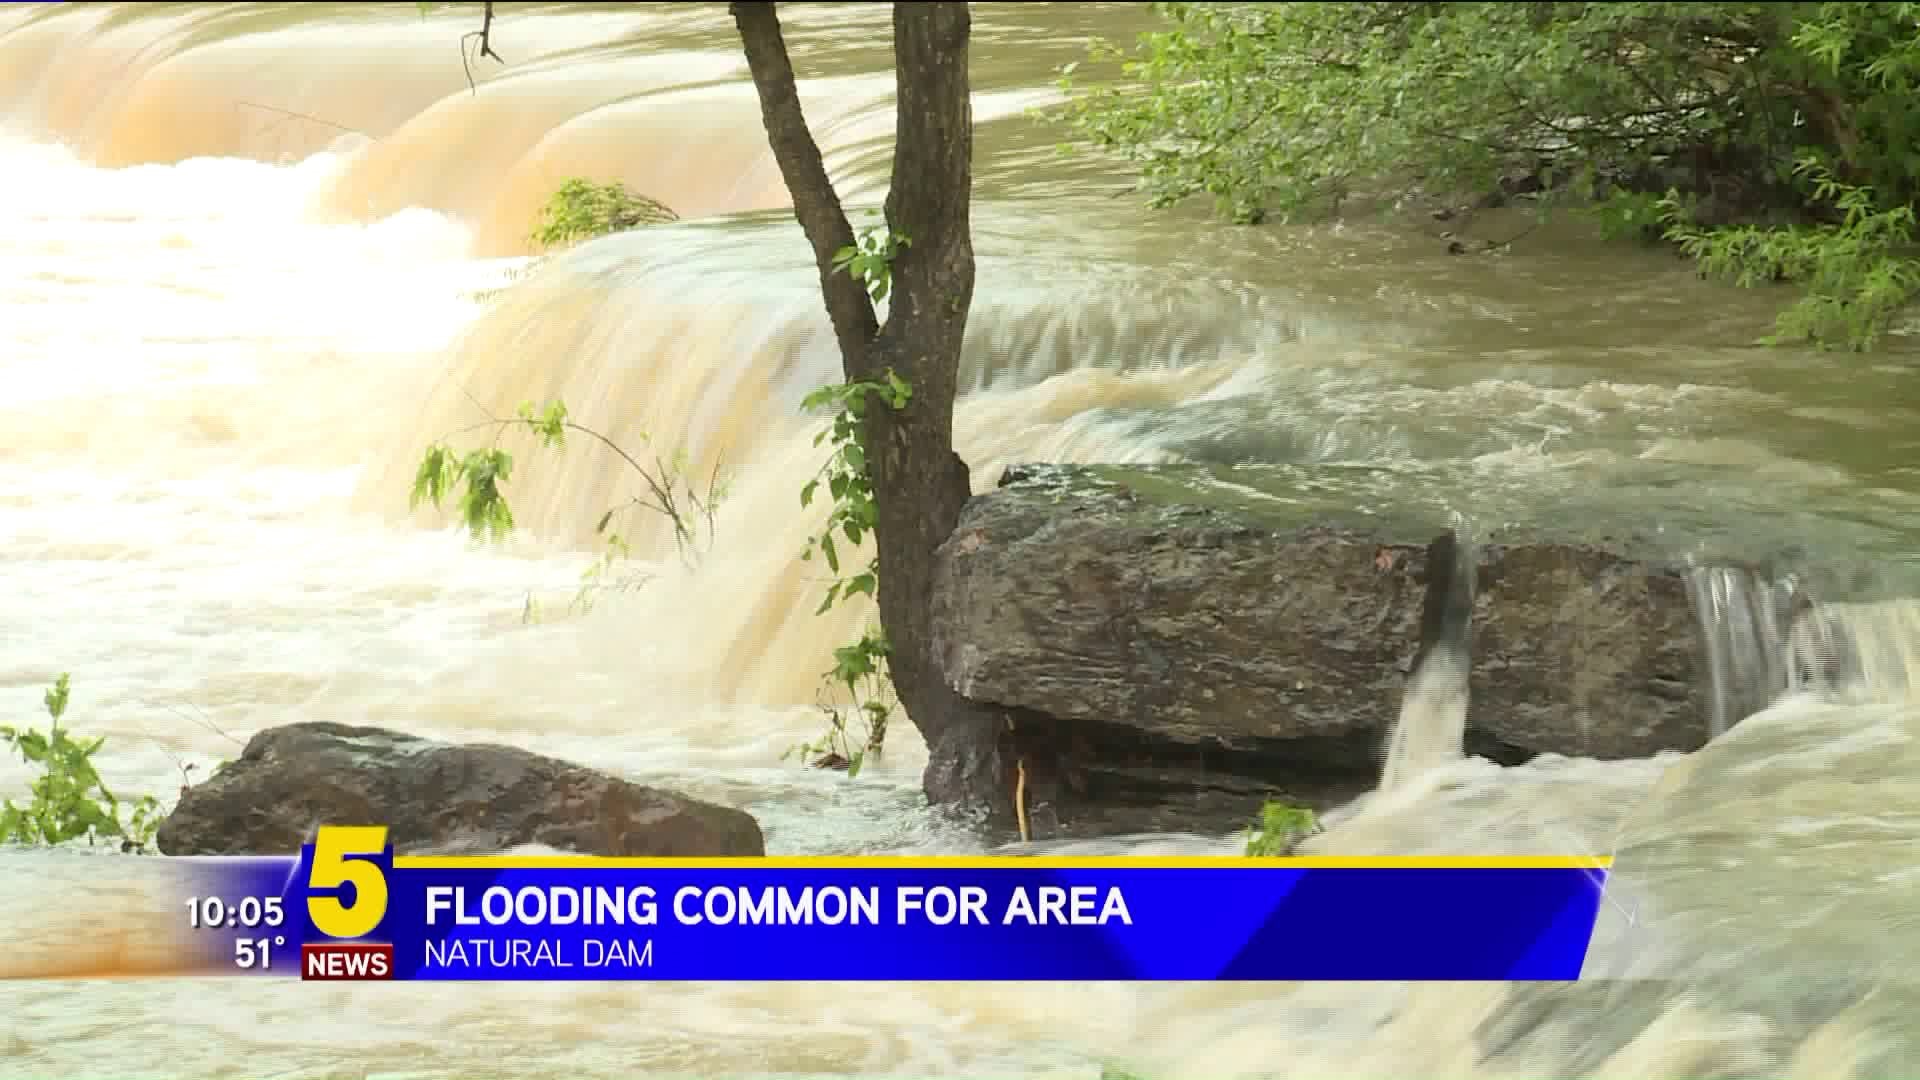 Flooding Common For Natural Dam Area